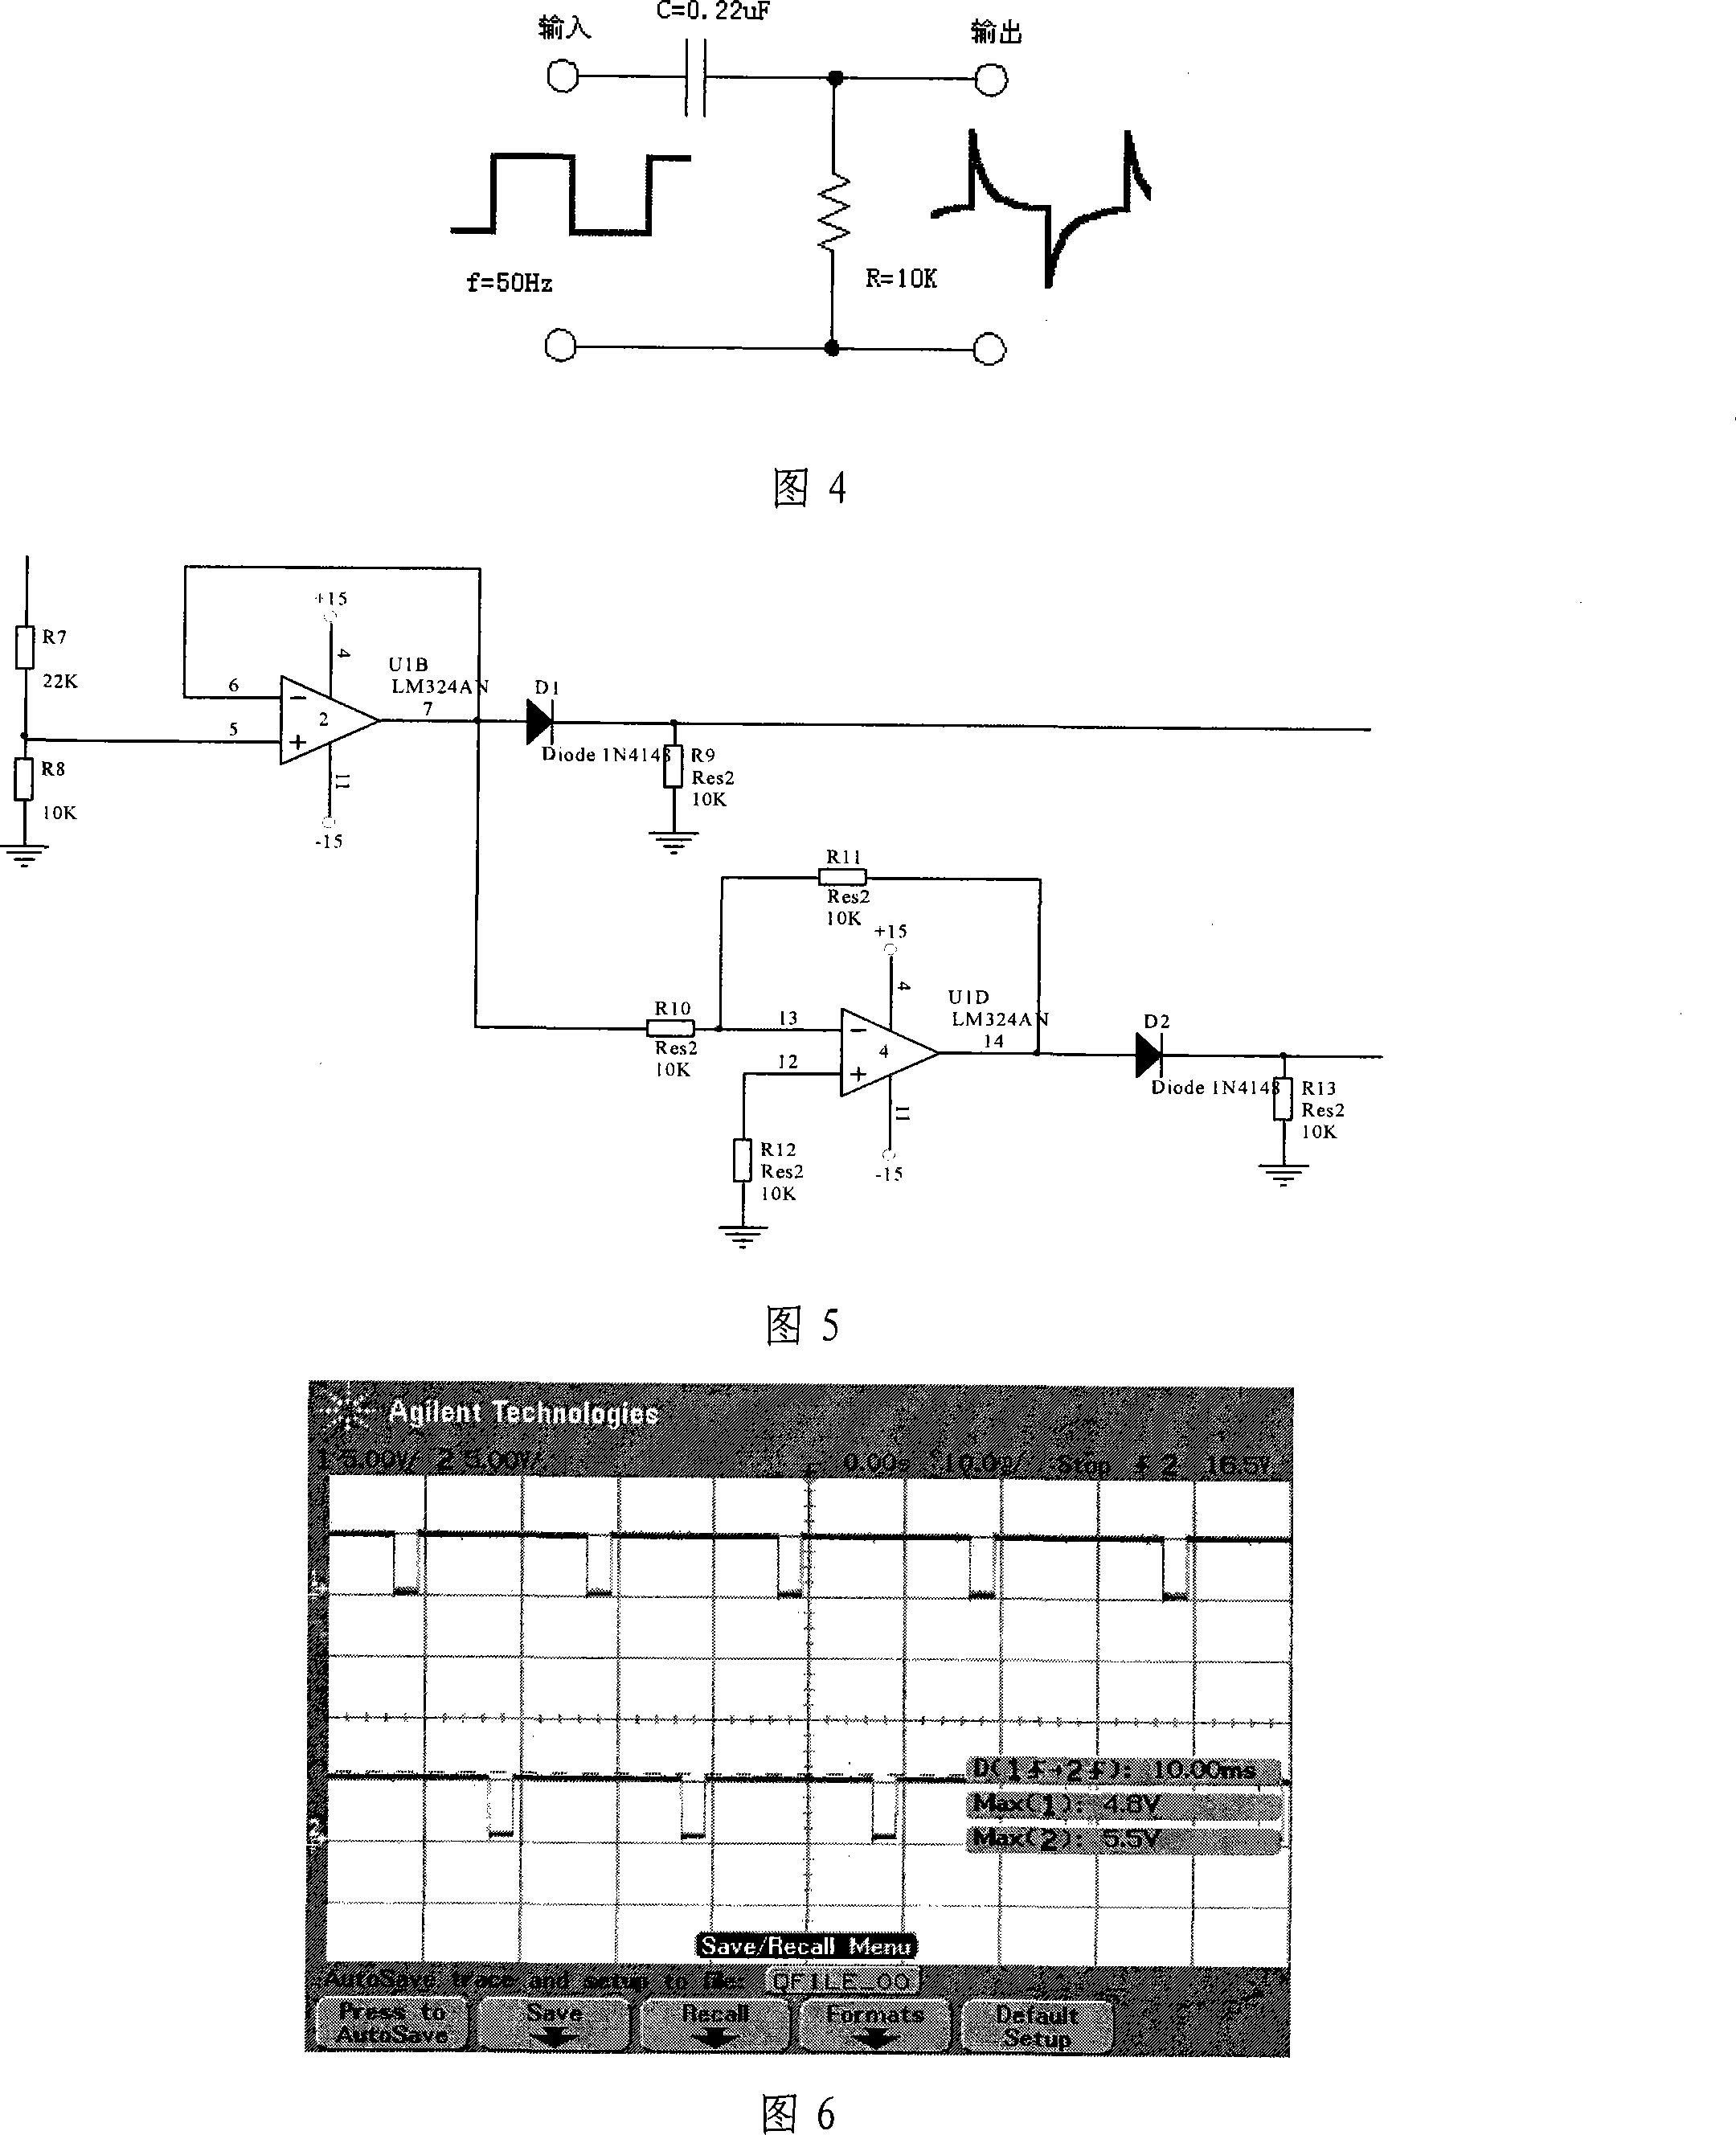 Method of double filum narrow interstice alternating-direct current pulse matching electric arc welding